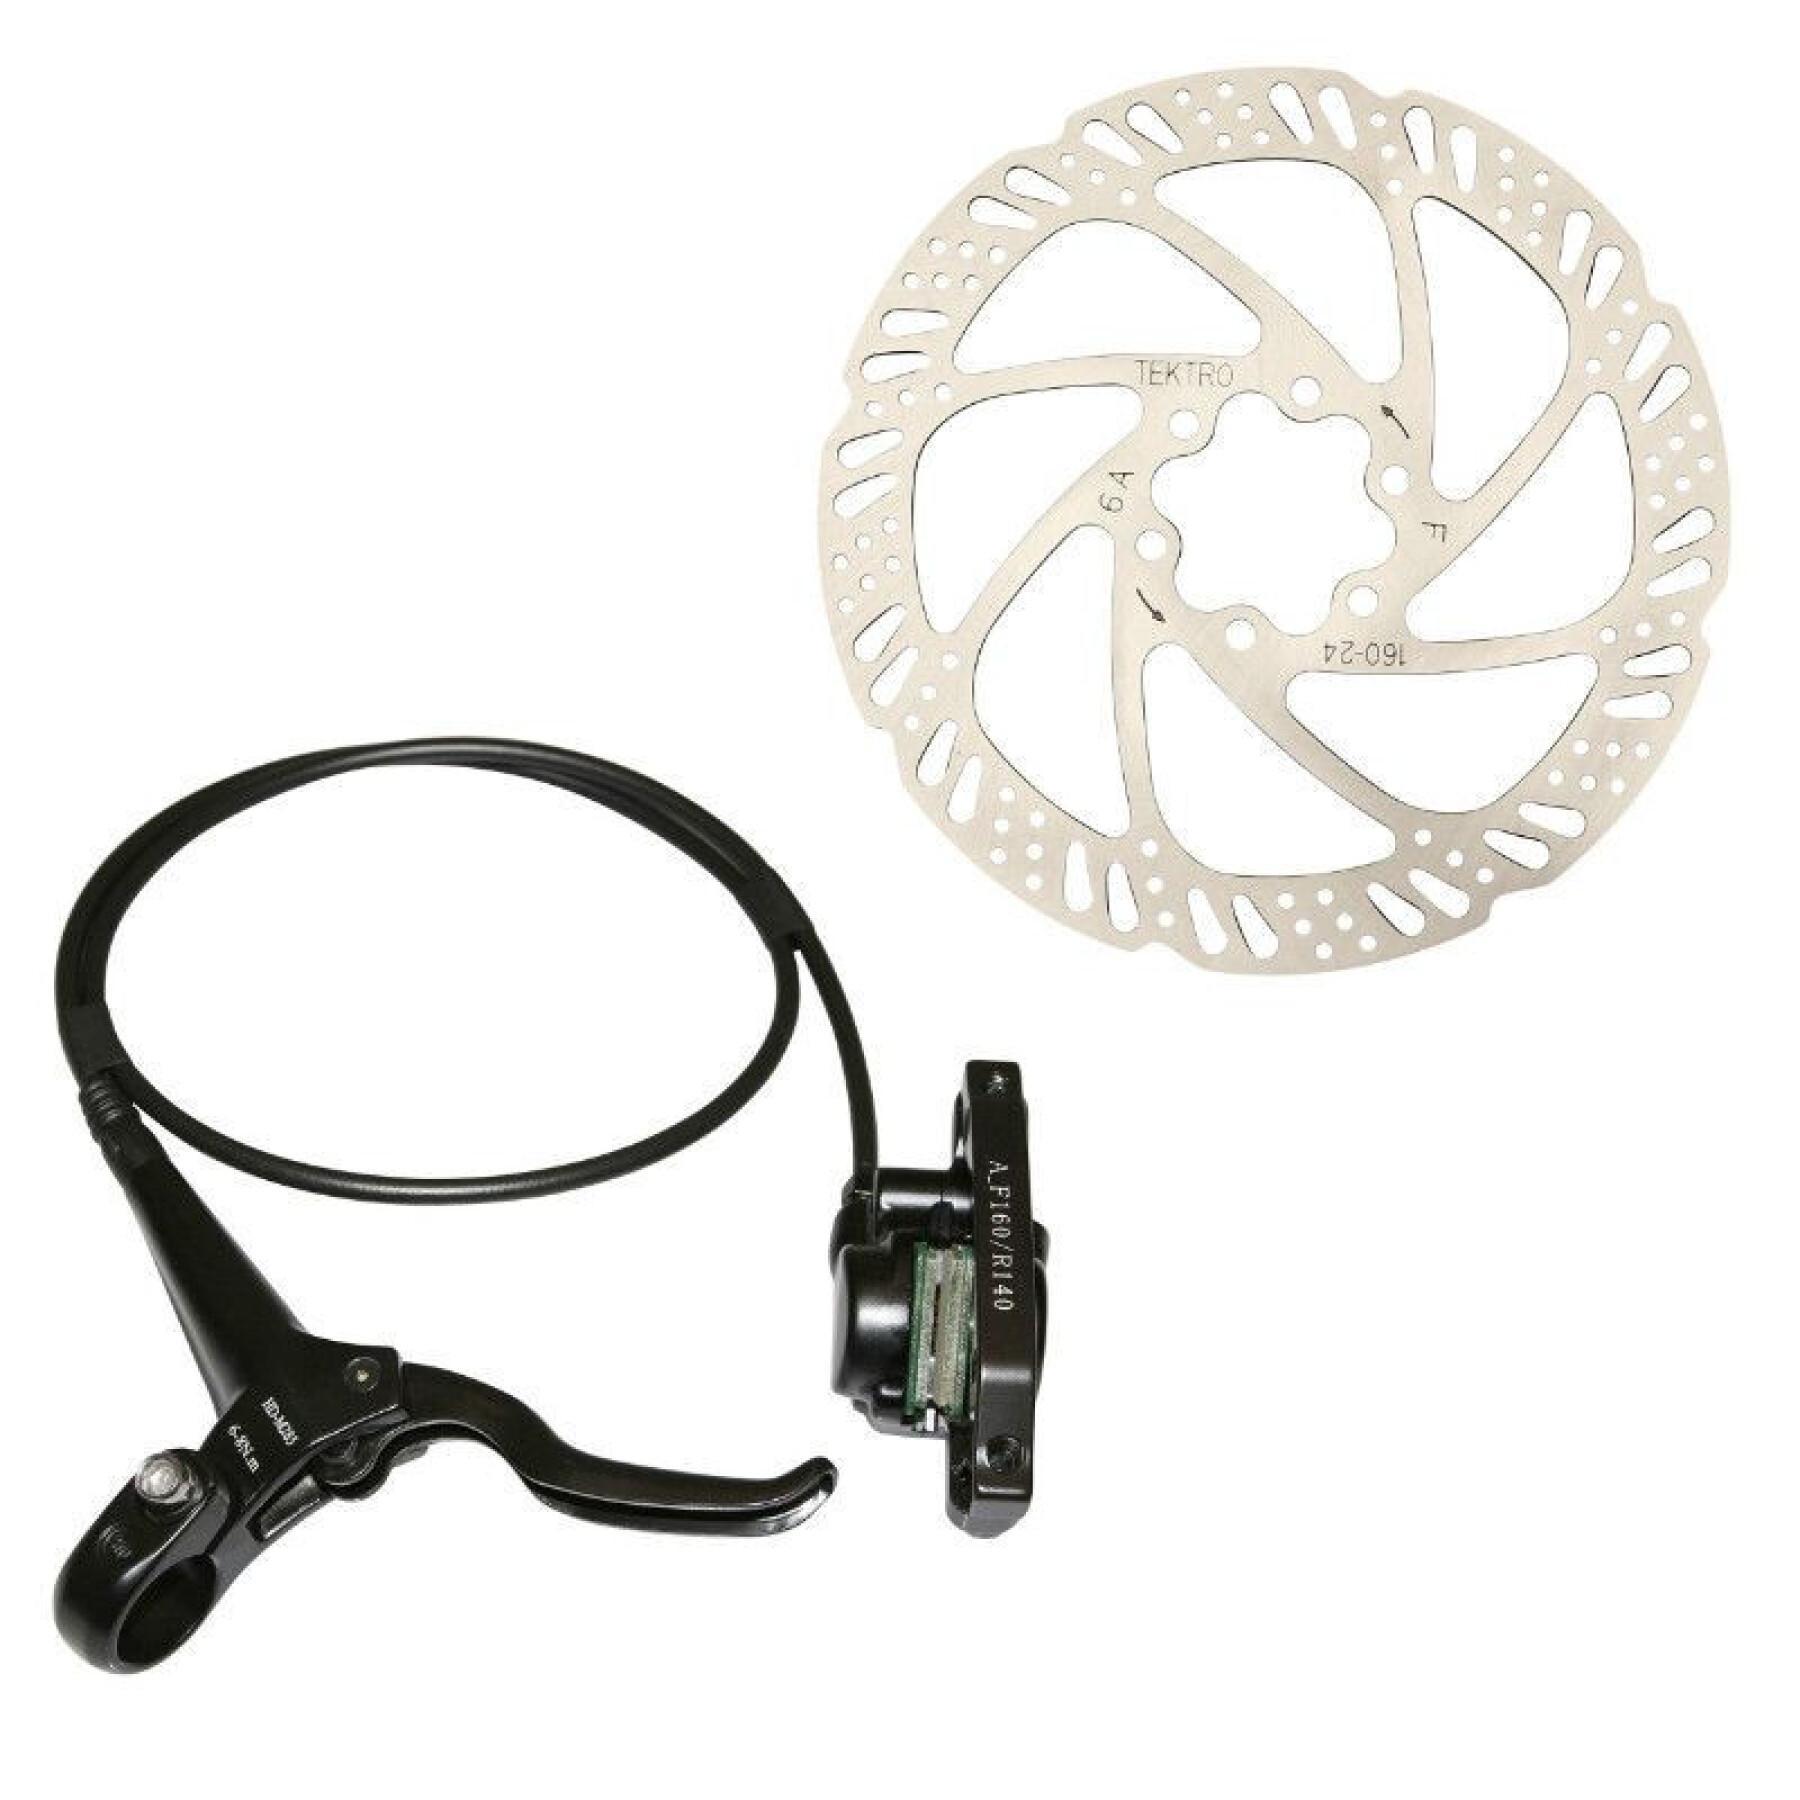 Front hydraulic disc brake with disc and adapter kit uses deore pads Tektro Auriga Post Mount